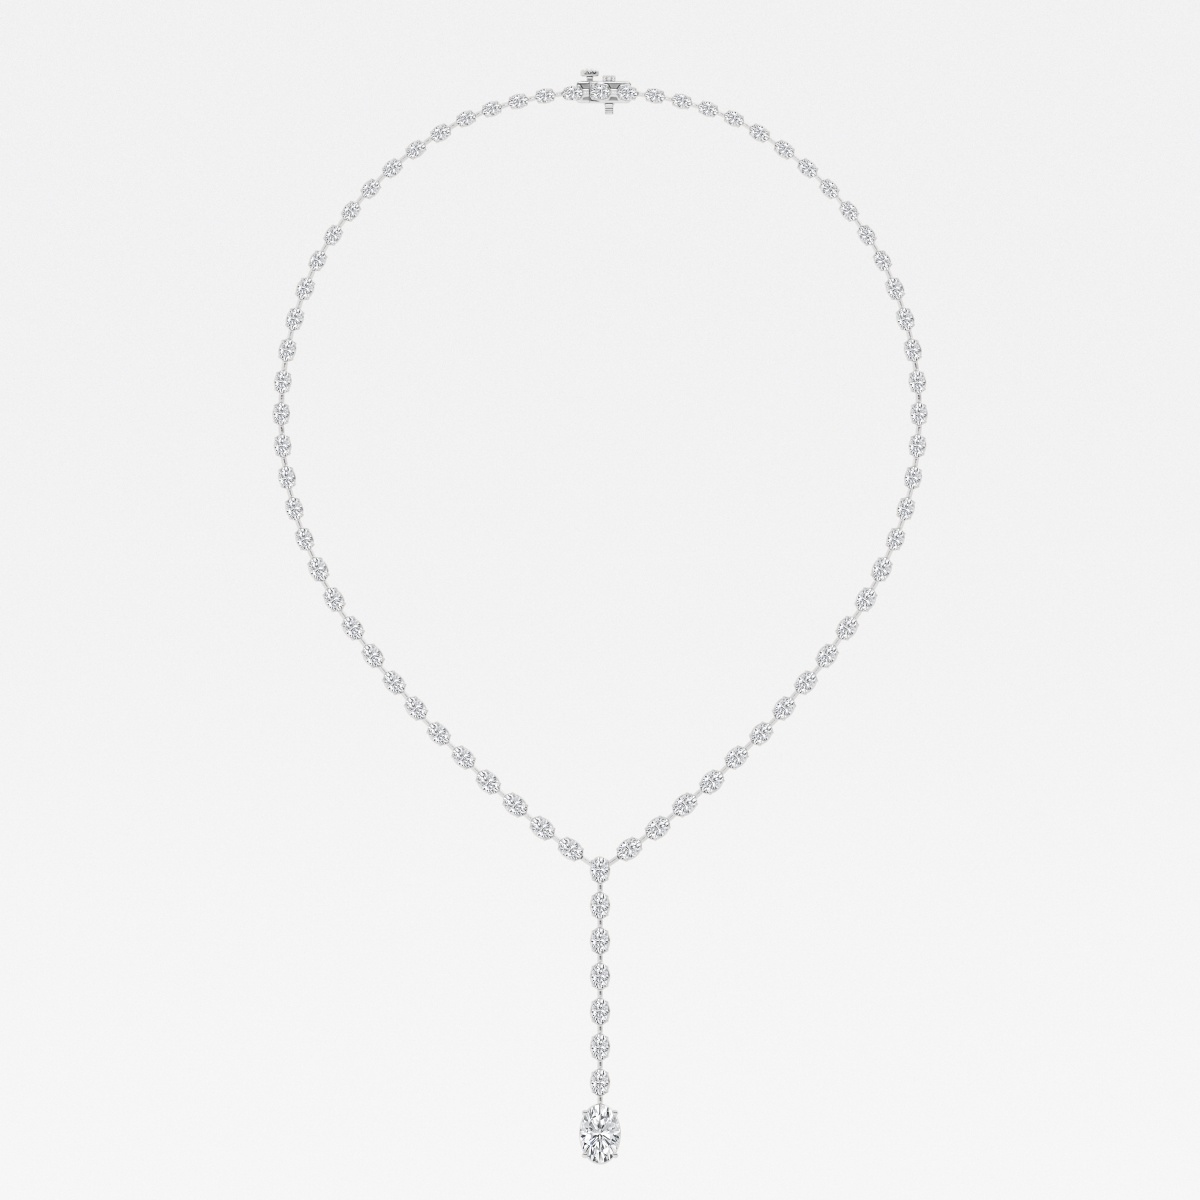 Additional Image 1 for  Badgley Mischka 17 ctw Oval Lab Grown Diamond Lariat Tennis Necklace